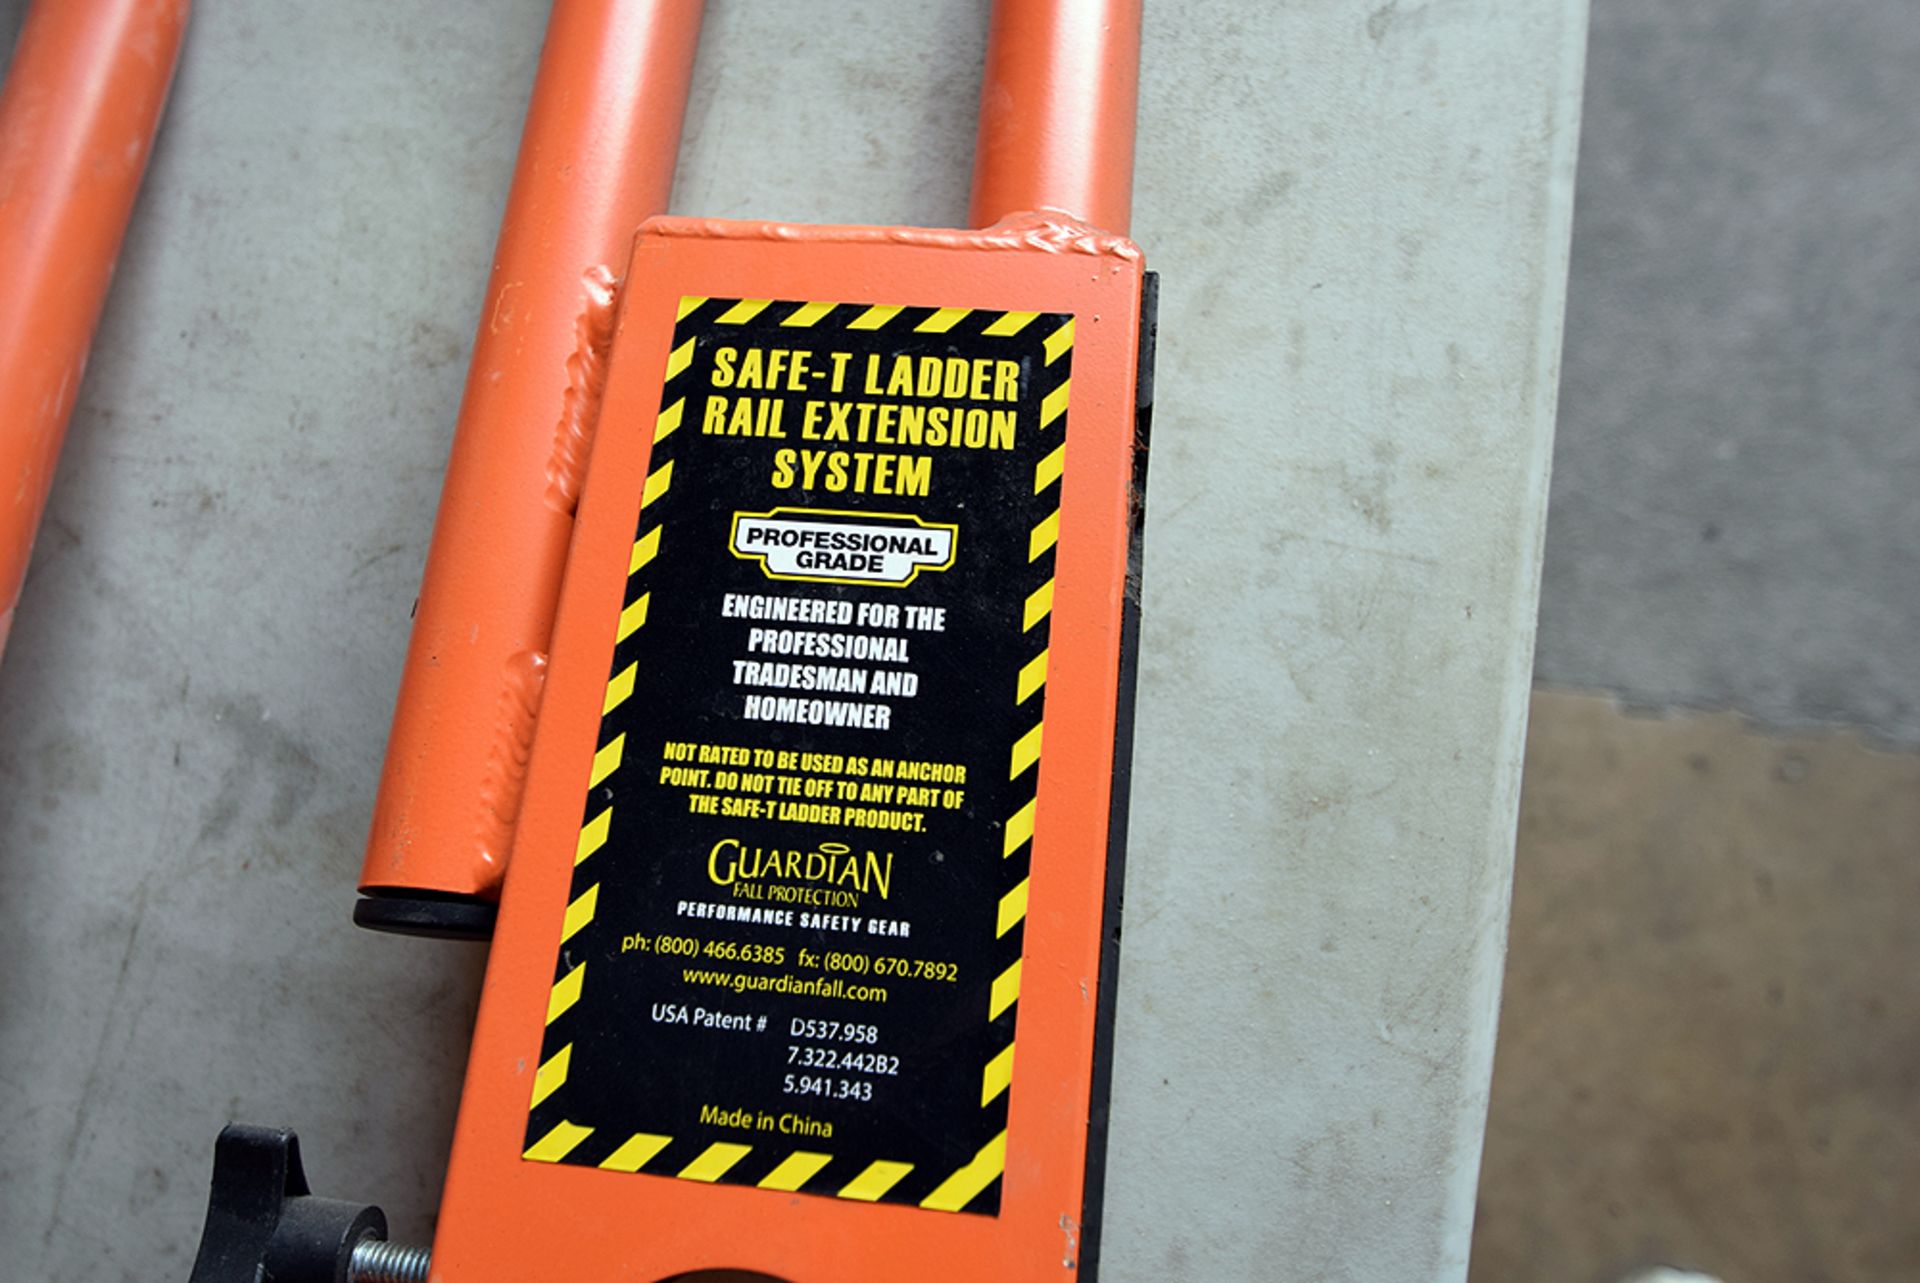 Guardian Fall Protection, Safety Ladder Rail Extensions - Image 2 of 6